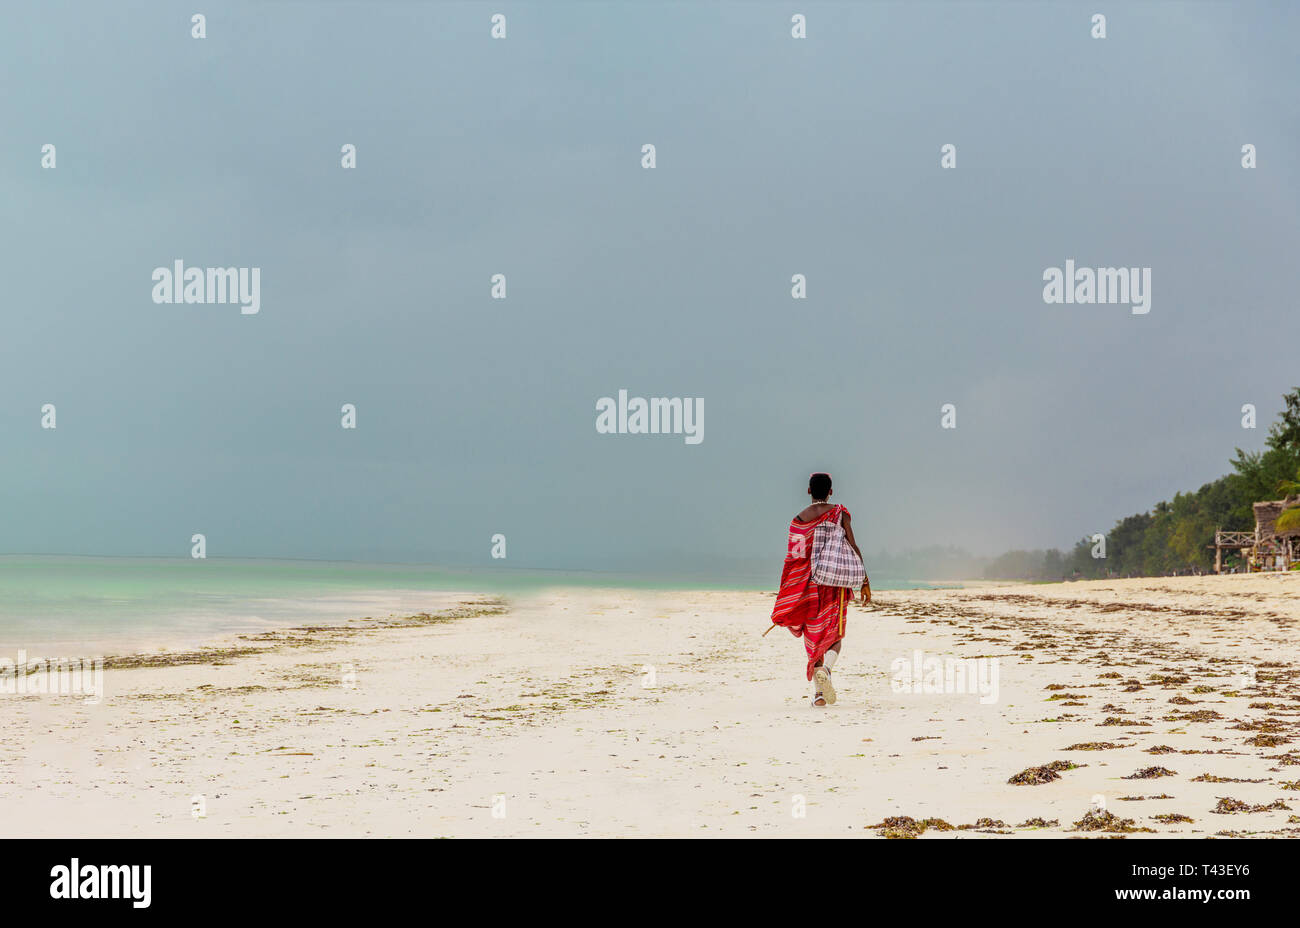 one unrecognizable man goes into the distance on the ocean ohland and carries a bag on his shoulderwhite bag, alone Stock Photo